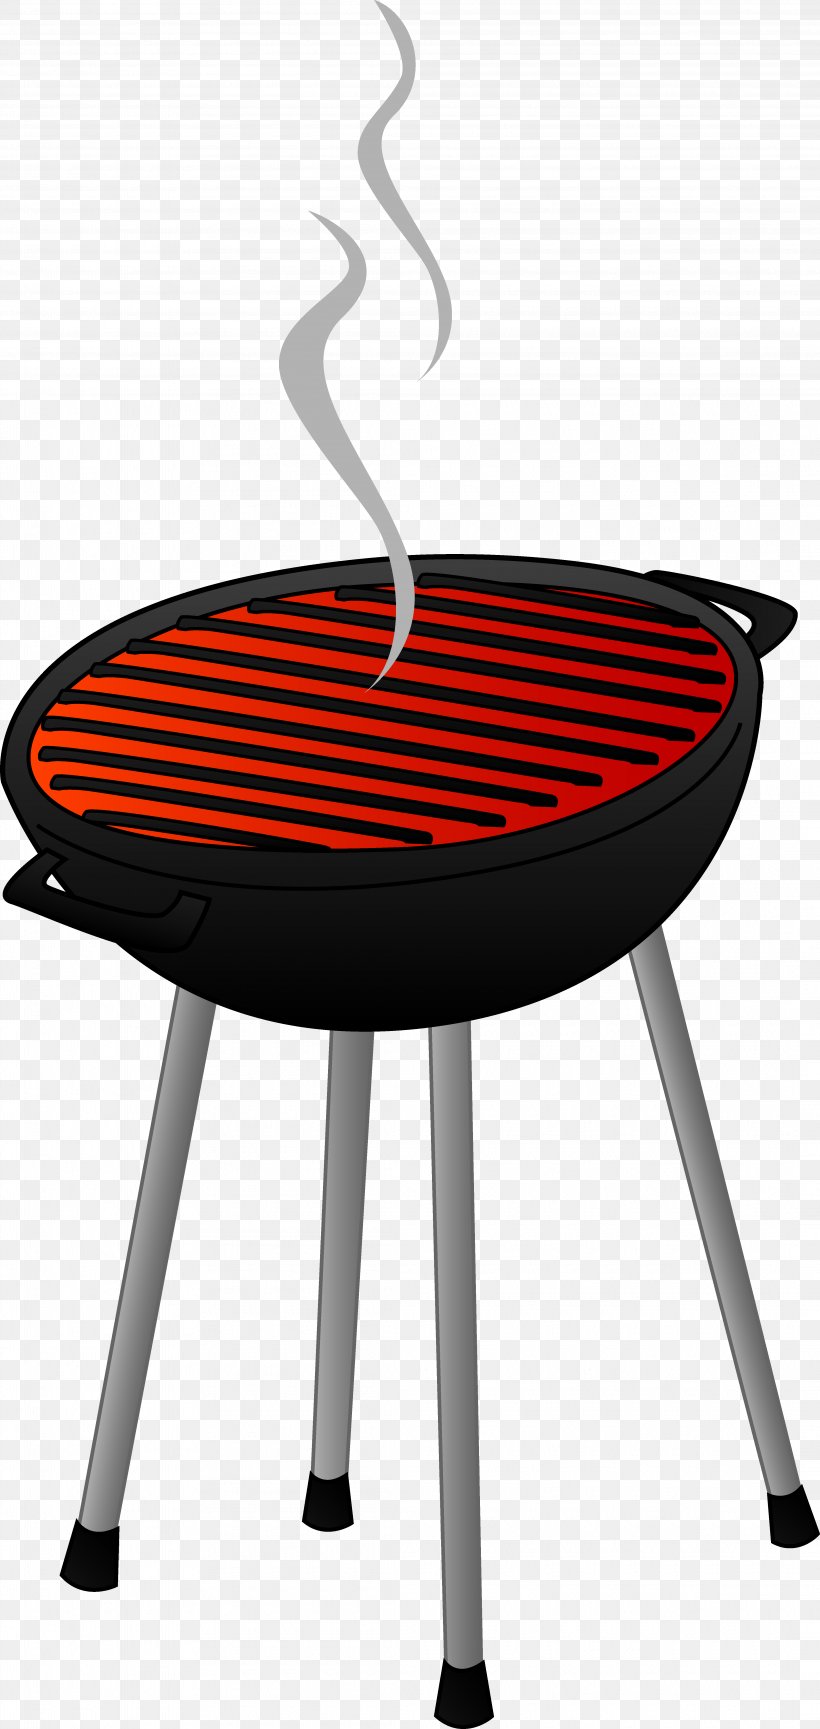 Barbecue Sauce Grilling Clip Art, PNG, 4235x8932px, Barbecue, Barbecue Sauce, Chair, Furniture, Grille Download Free